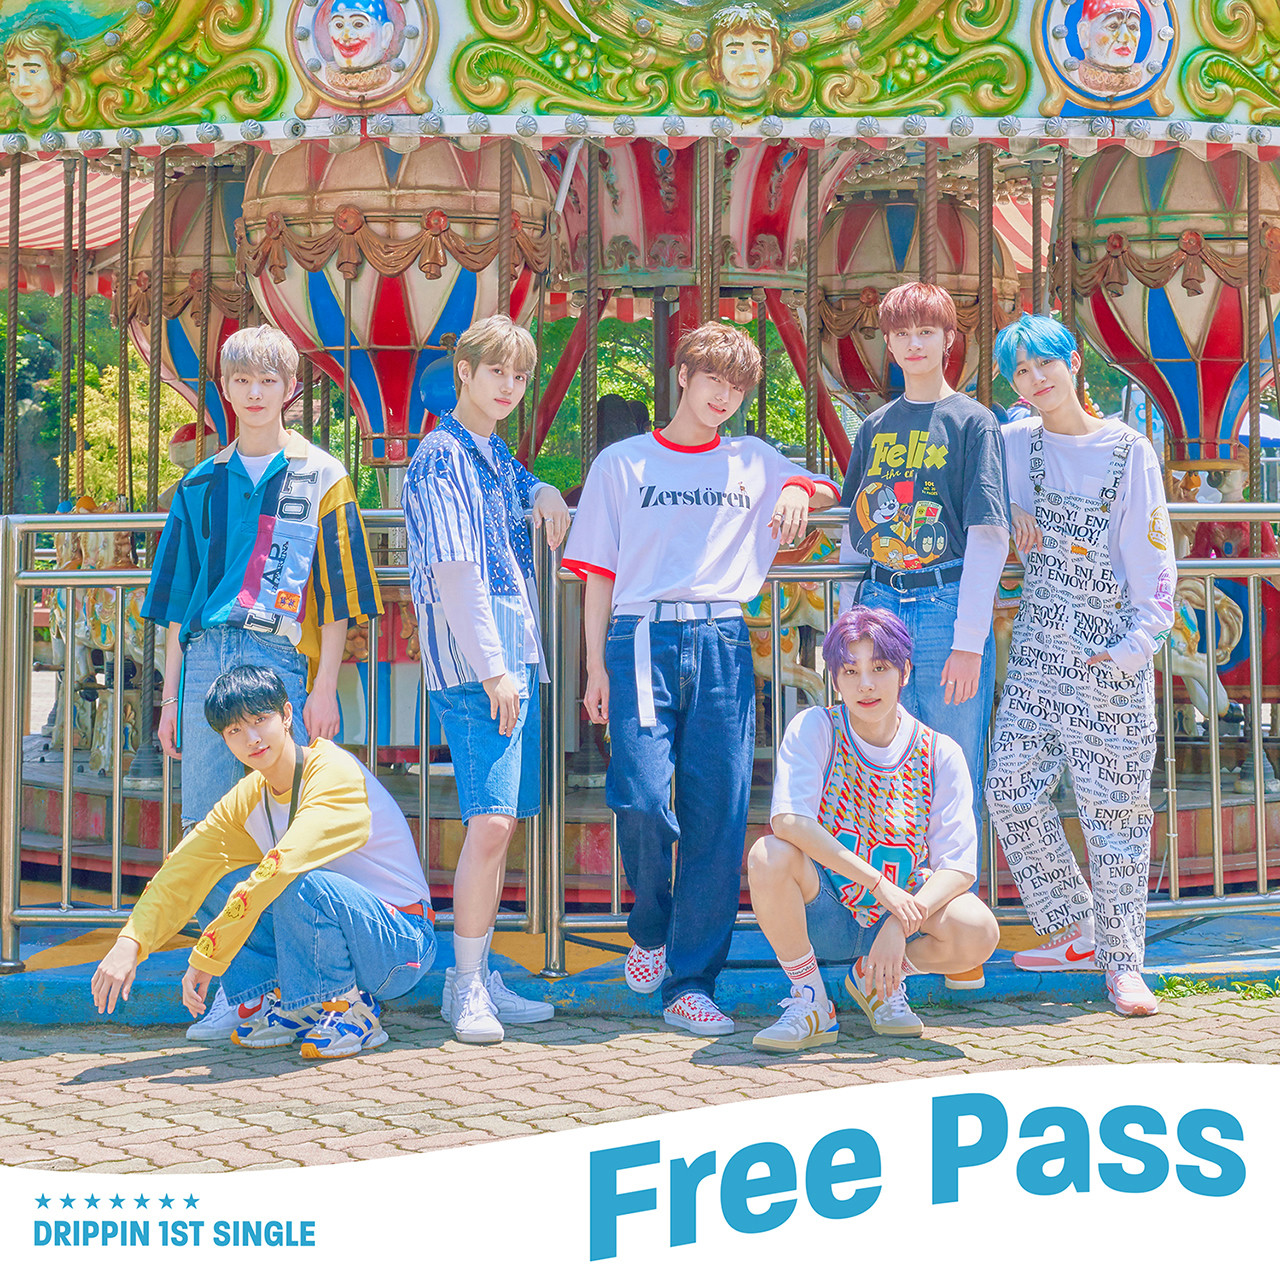 1st SINGLE『Free Pass』 - DRIPPIN JAPAN OFFICIAL FANCLUB 【DREAMIN 